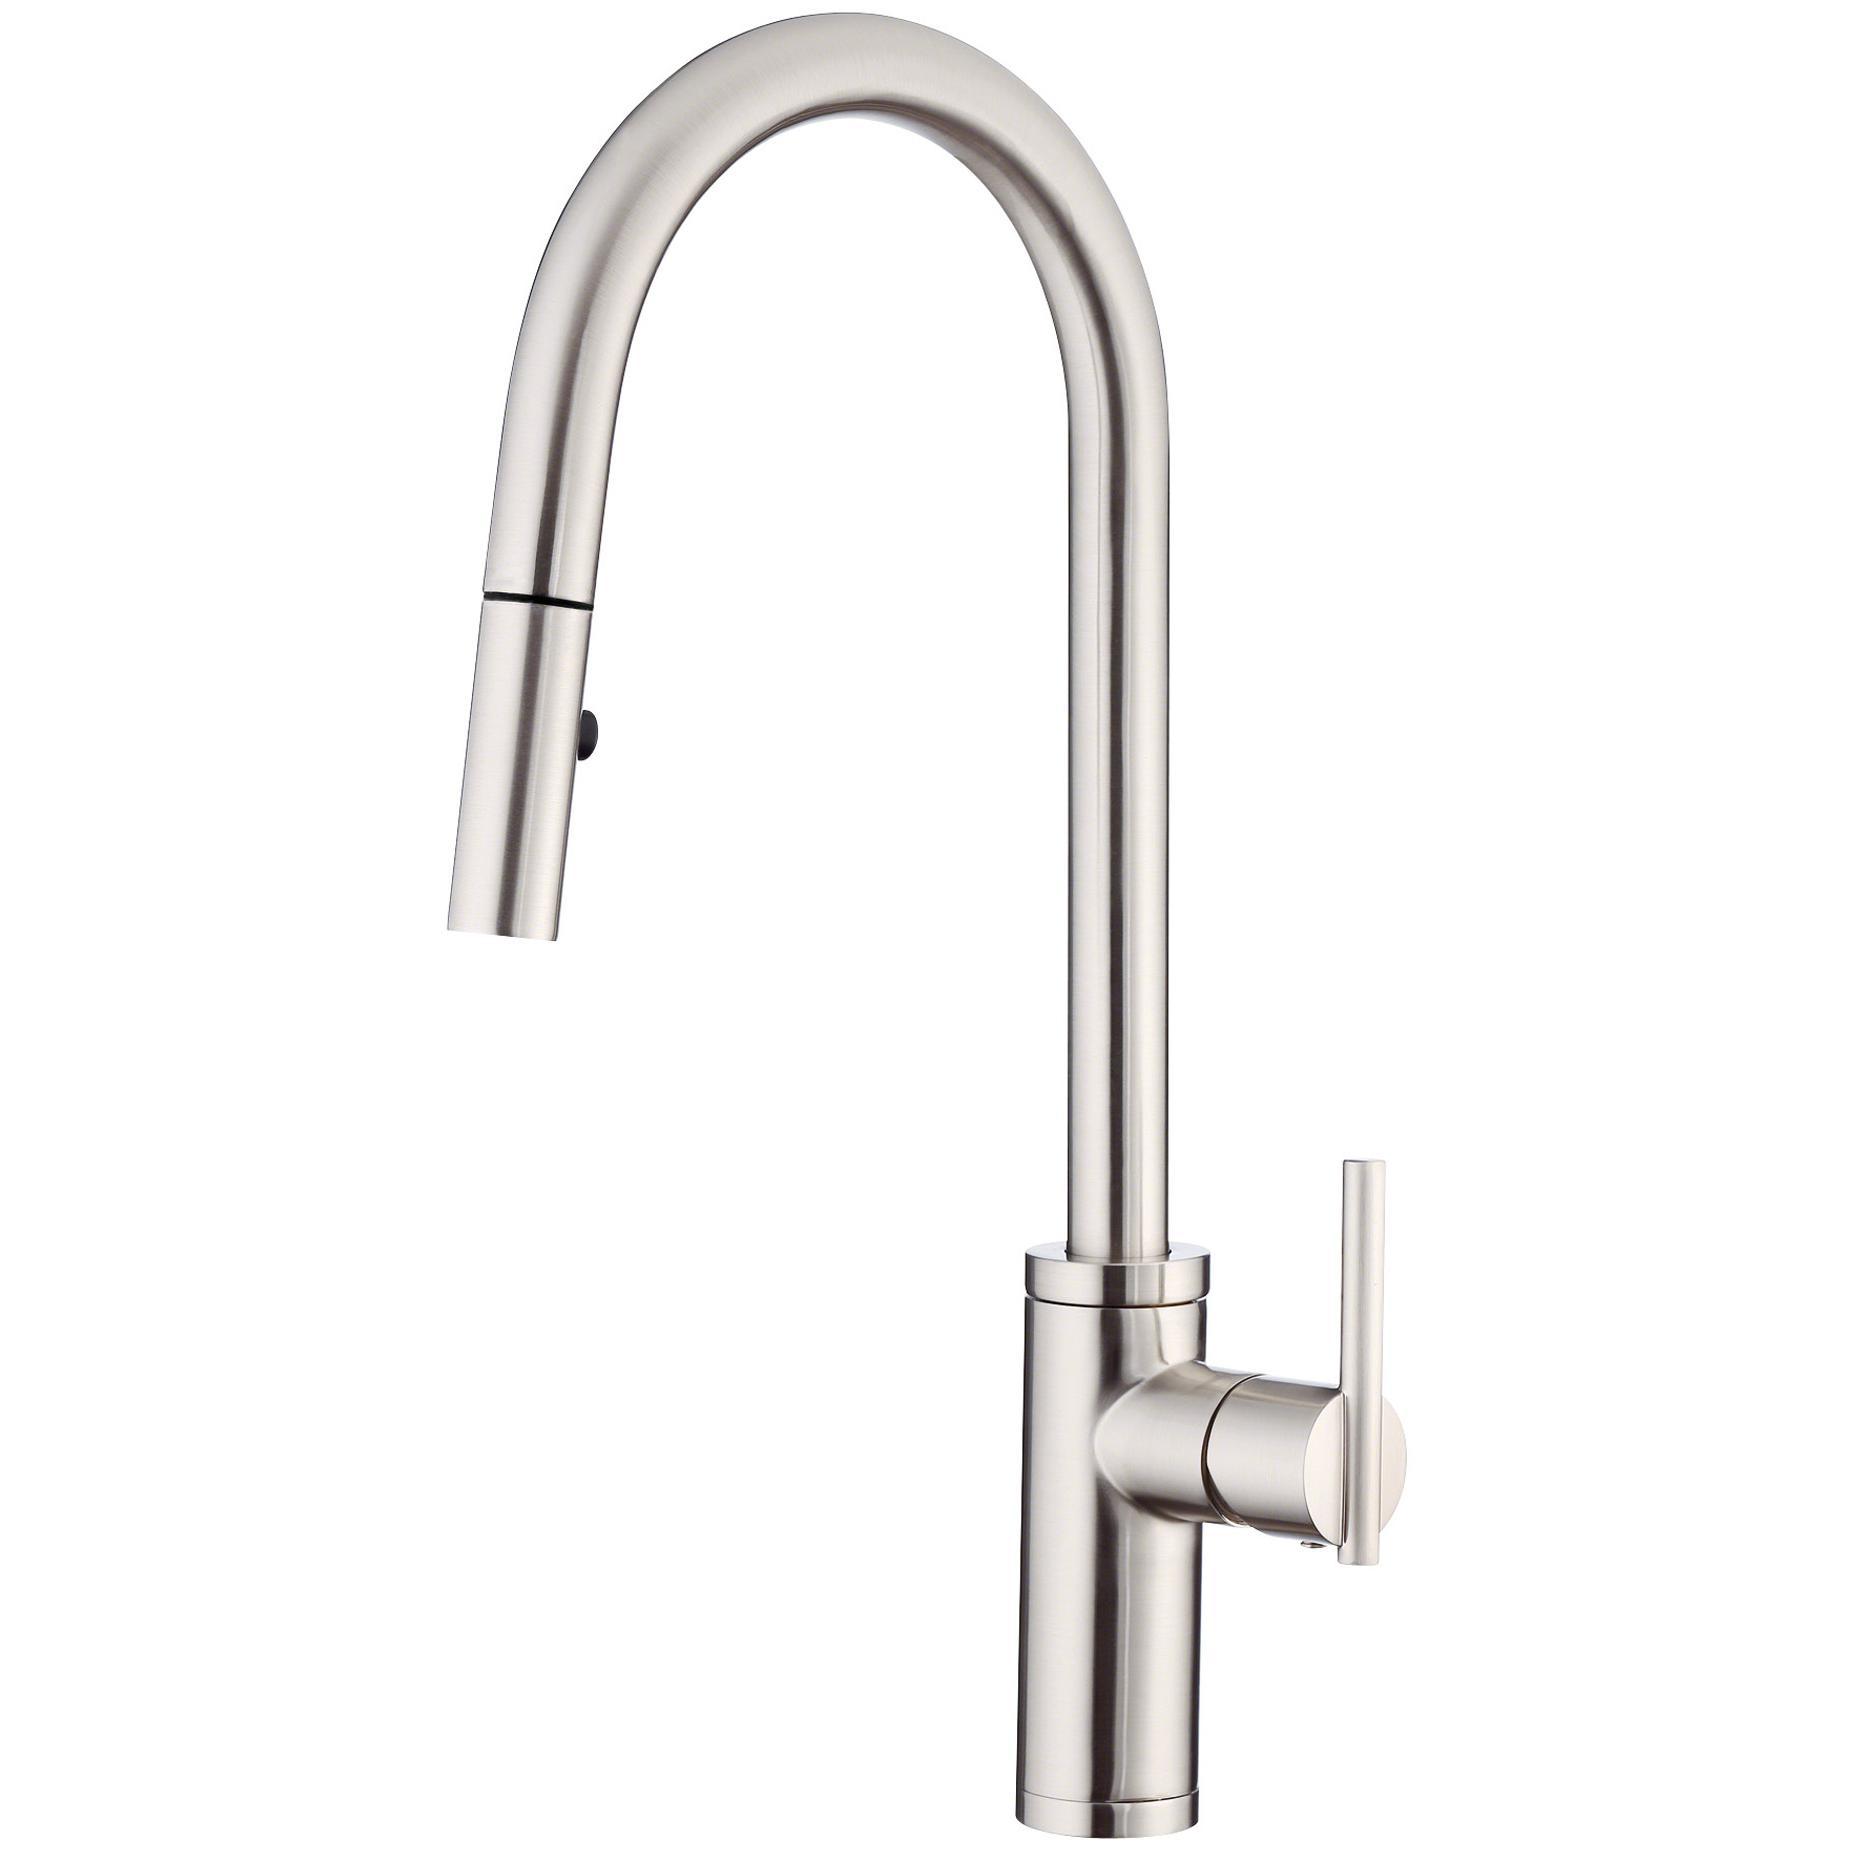 Danze D454058SS Parma Cafe Pull-Down Kitchen Faucet w/ SnapBack Retraction - Stainless Steel